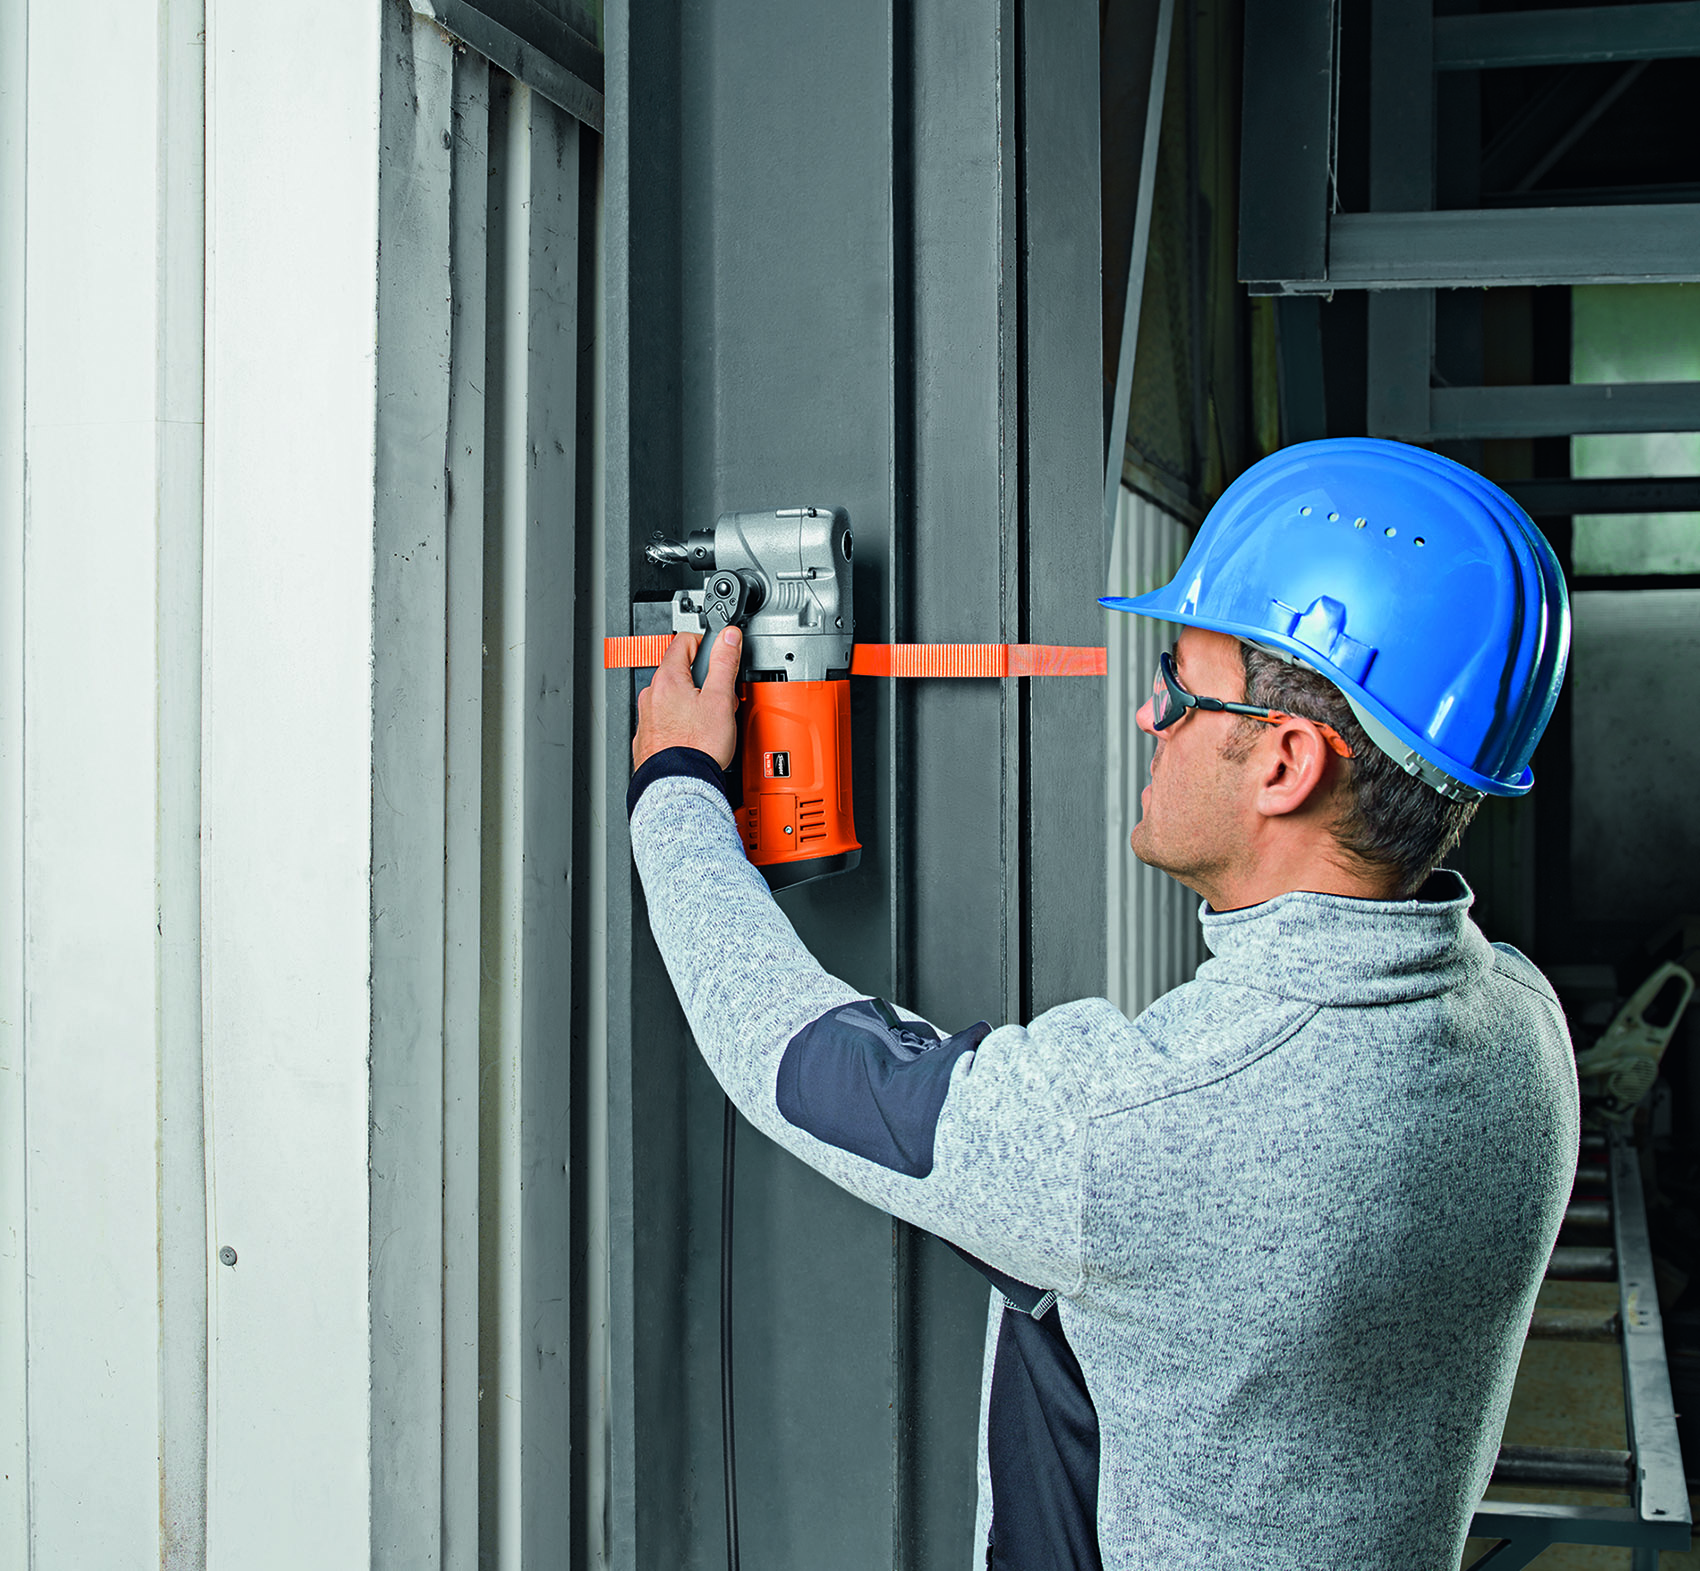 The JMC USA 90 is the latest, and most versatile compact magnetic based drill being added to the Slugger by FEIN line metal working tools and accessories.